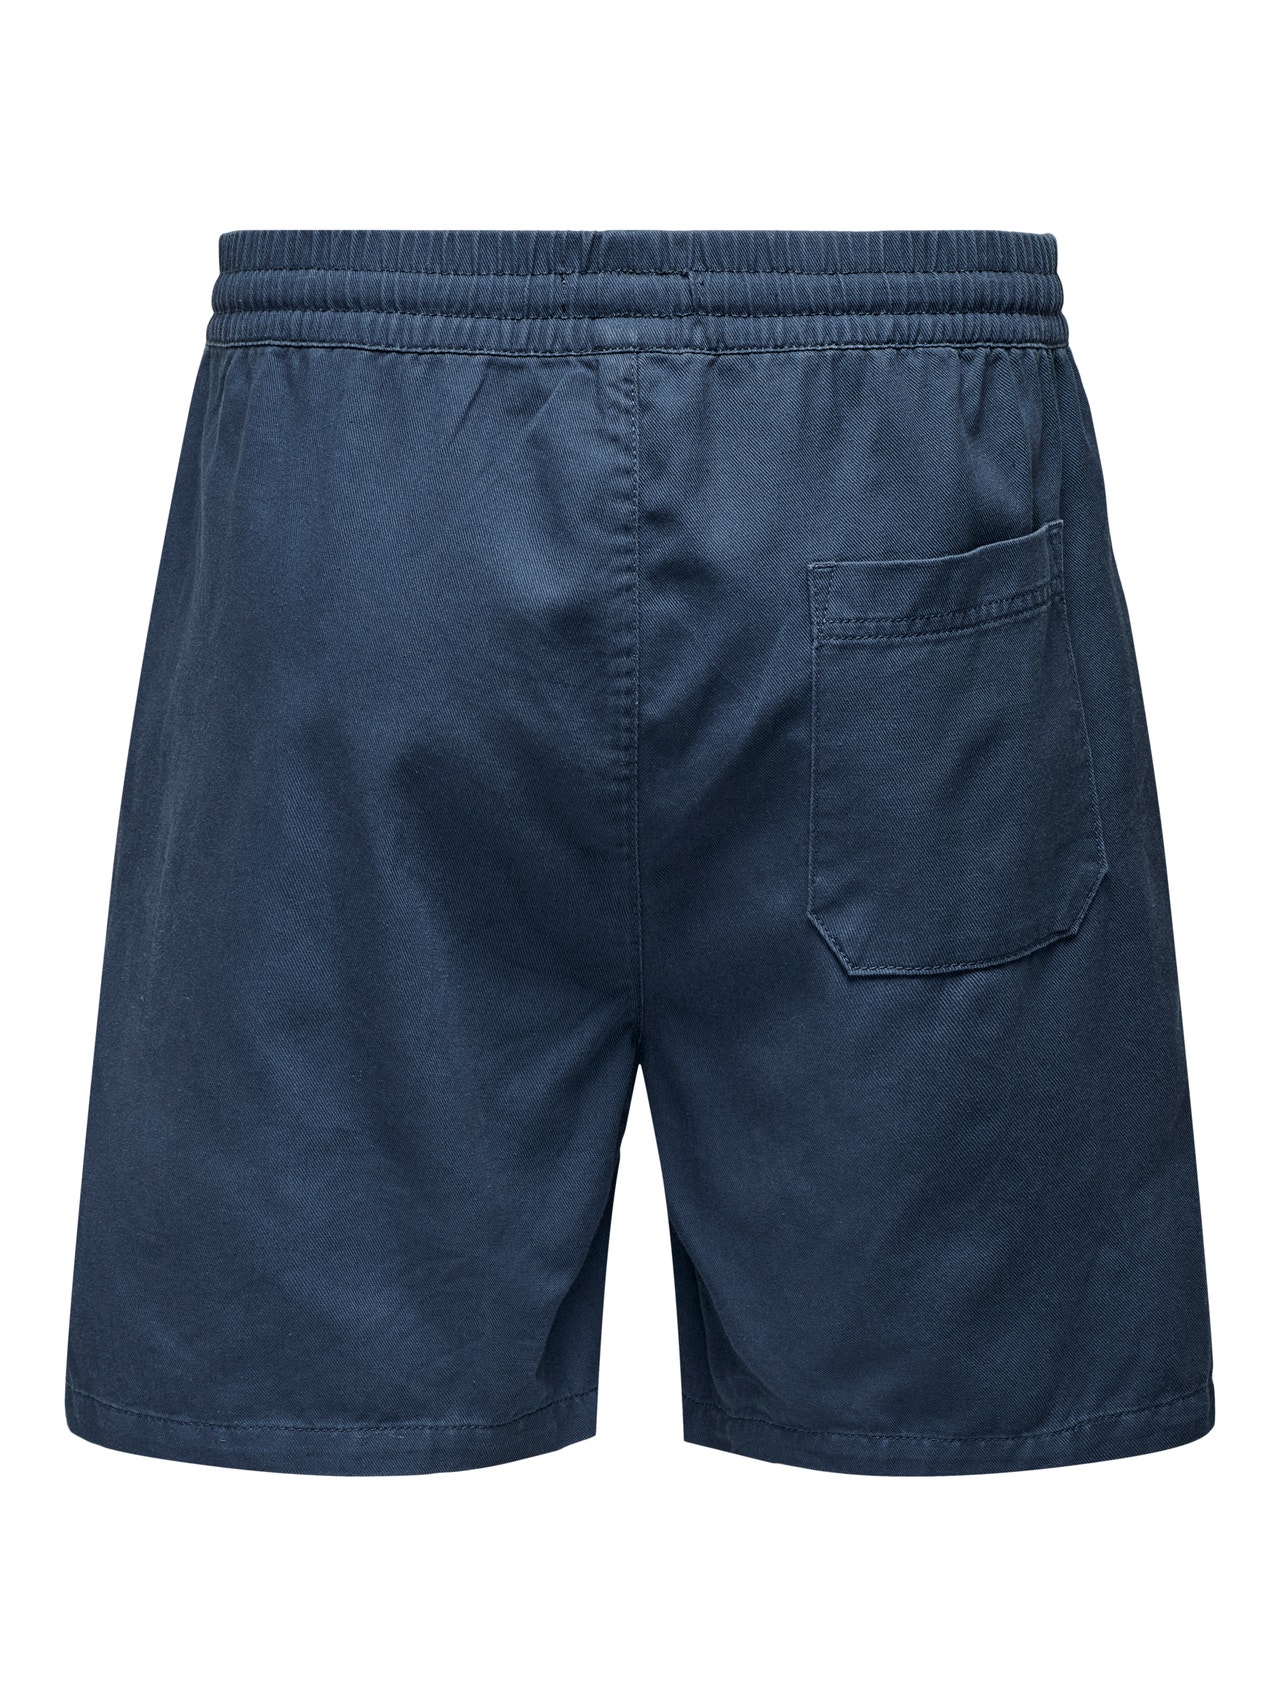 ONLY & SONS Shorts Corte regular Talle medio -Sargasso Sea - 22025790